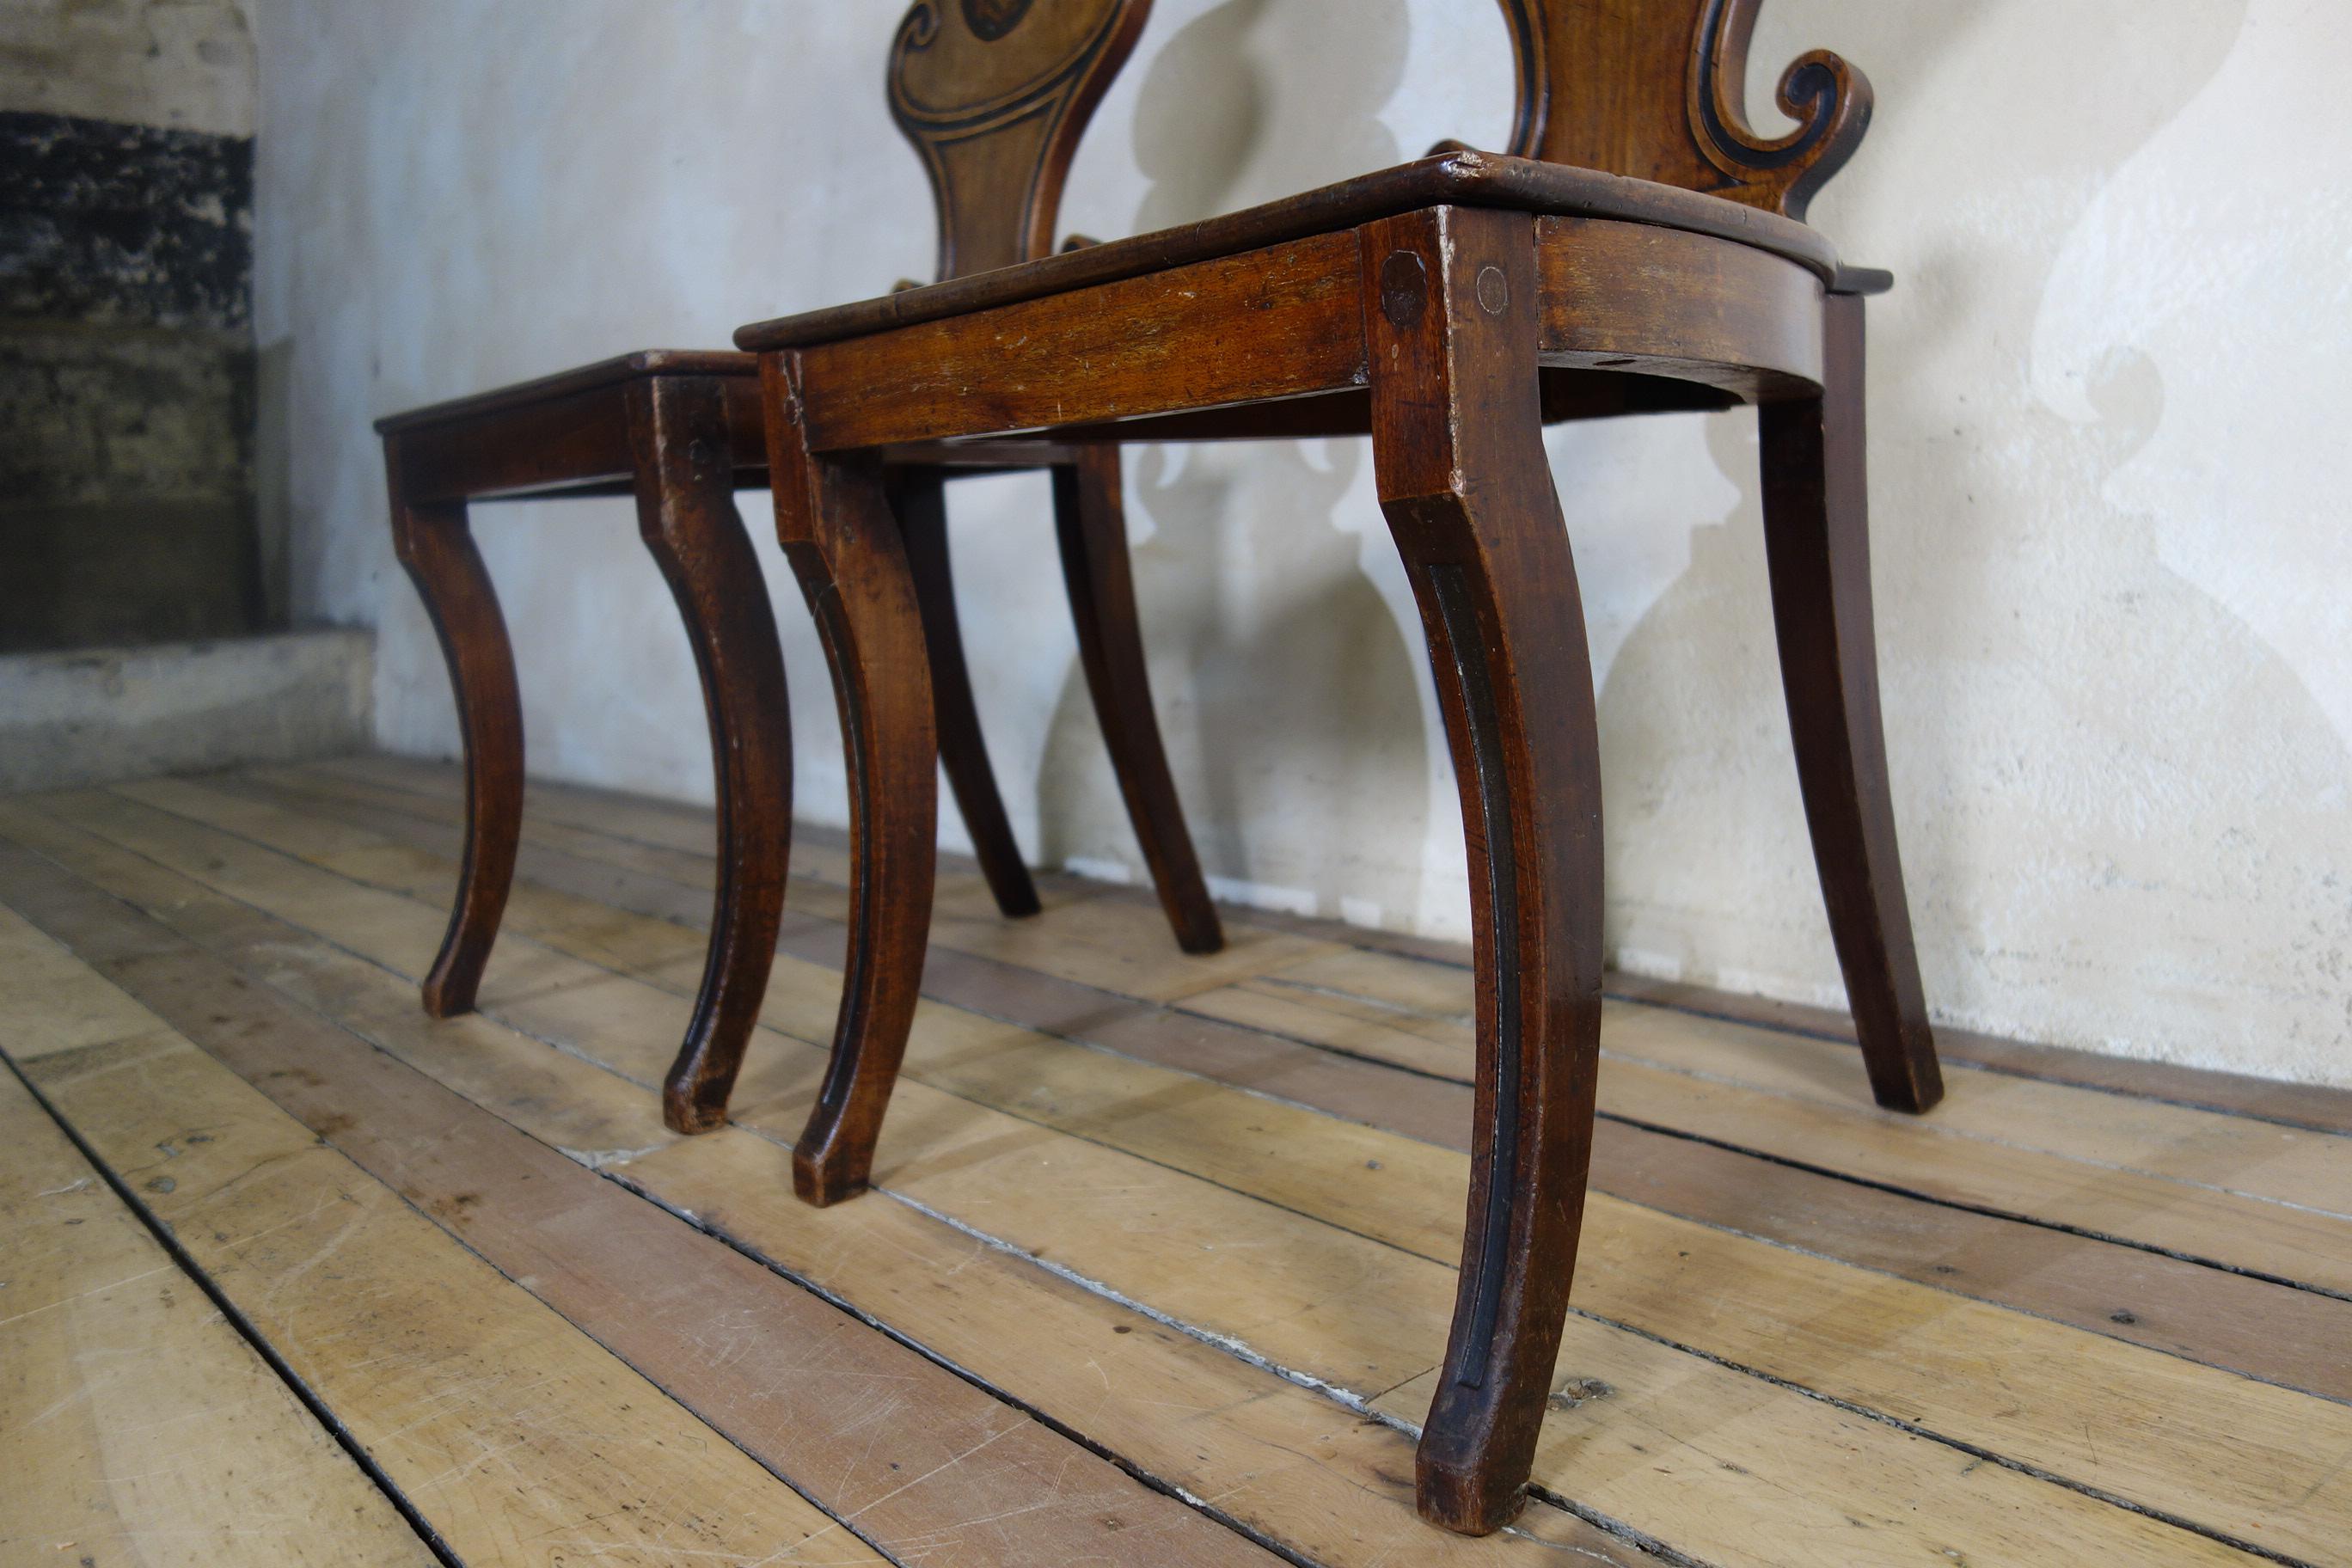 An exceptional pair of George III mahogany hall chairs.  Demonstrating an Italian influence displayed in the single ebonized fluted decoration to the scrollwork design and front sabre legs. Presenting a rich and warm patination